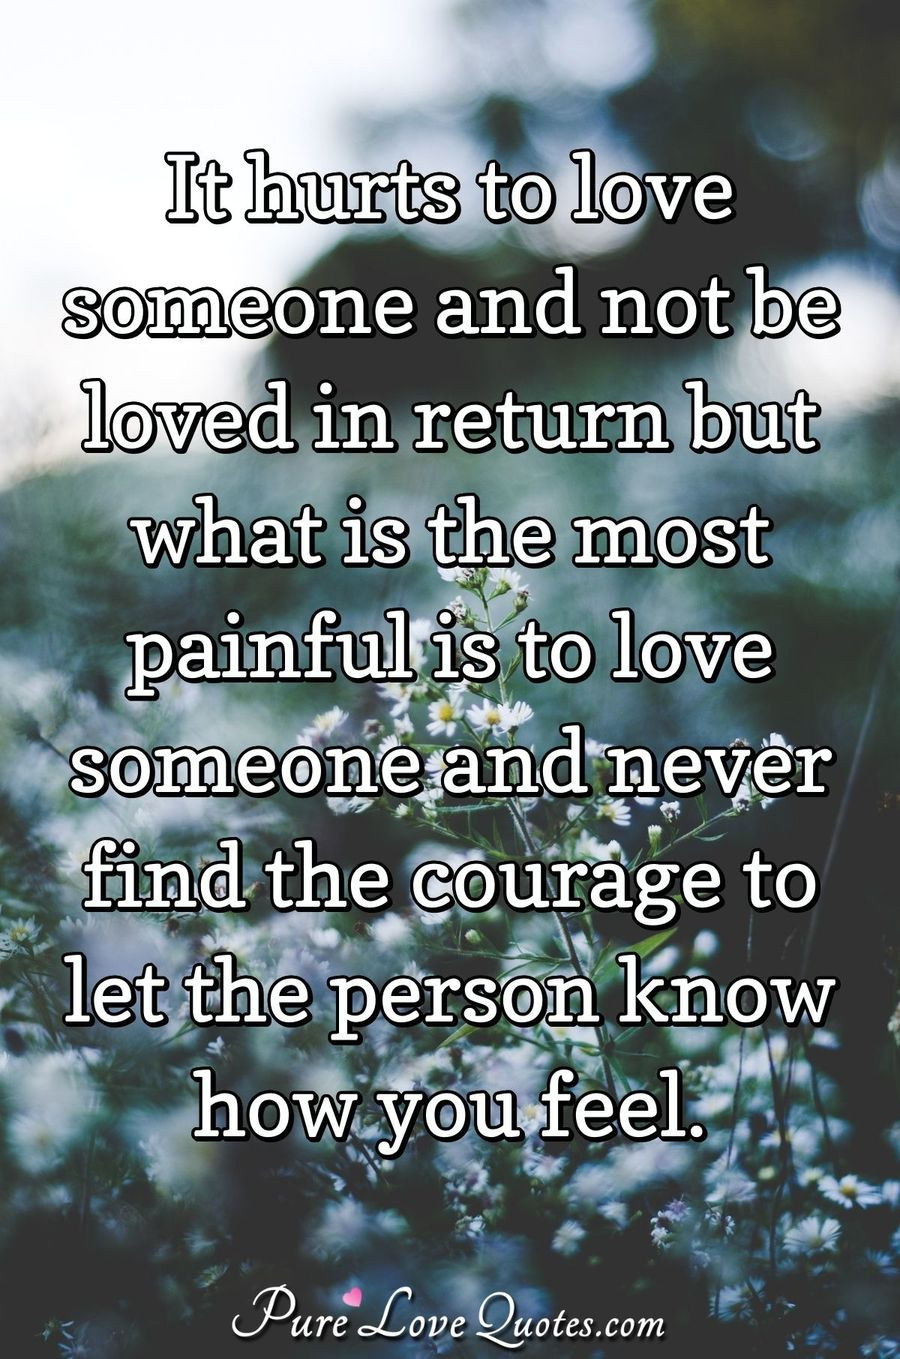 Quotes About Pain And Love
 It hurts to love someone and not be loved in return but